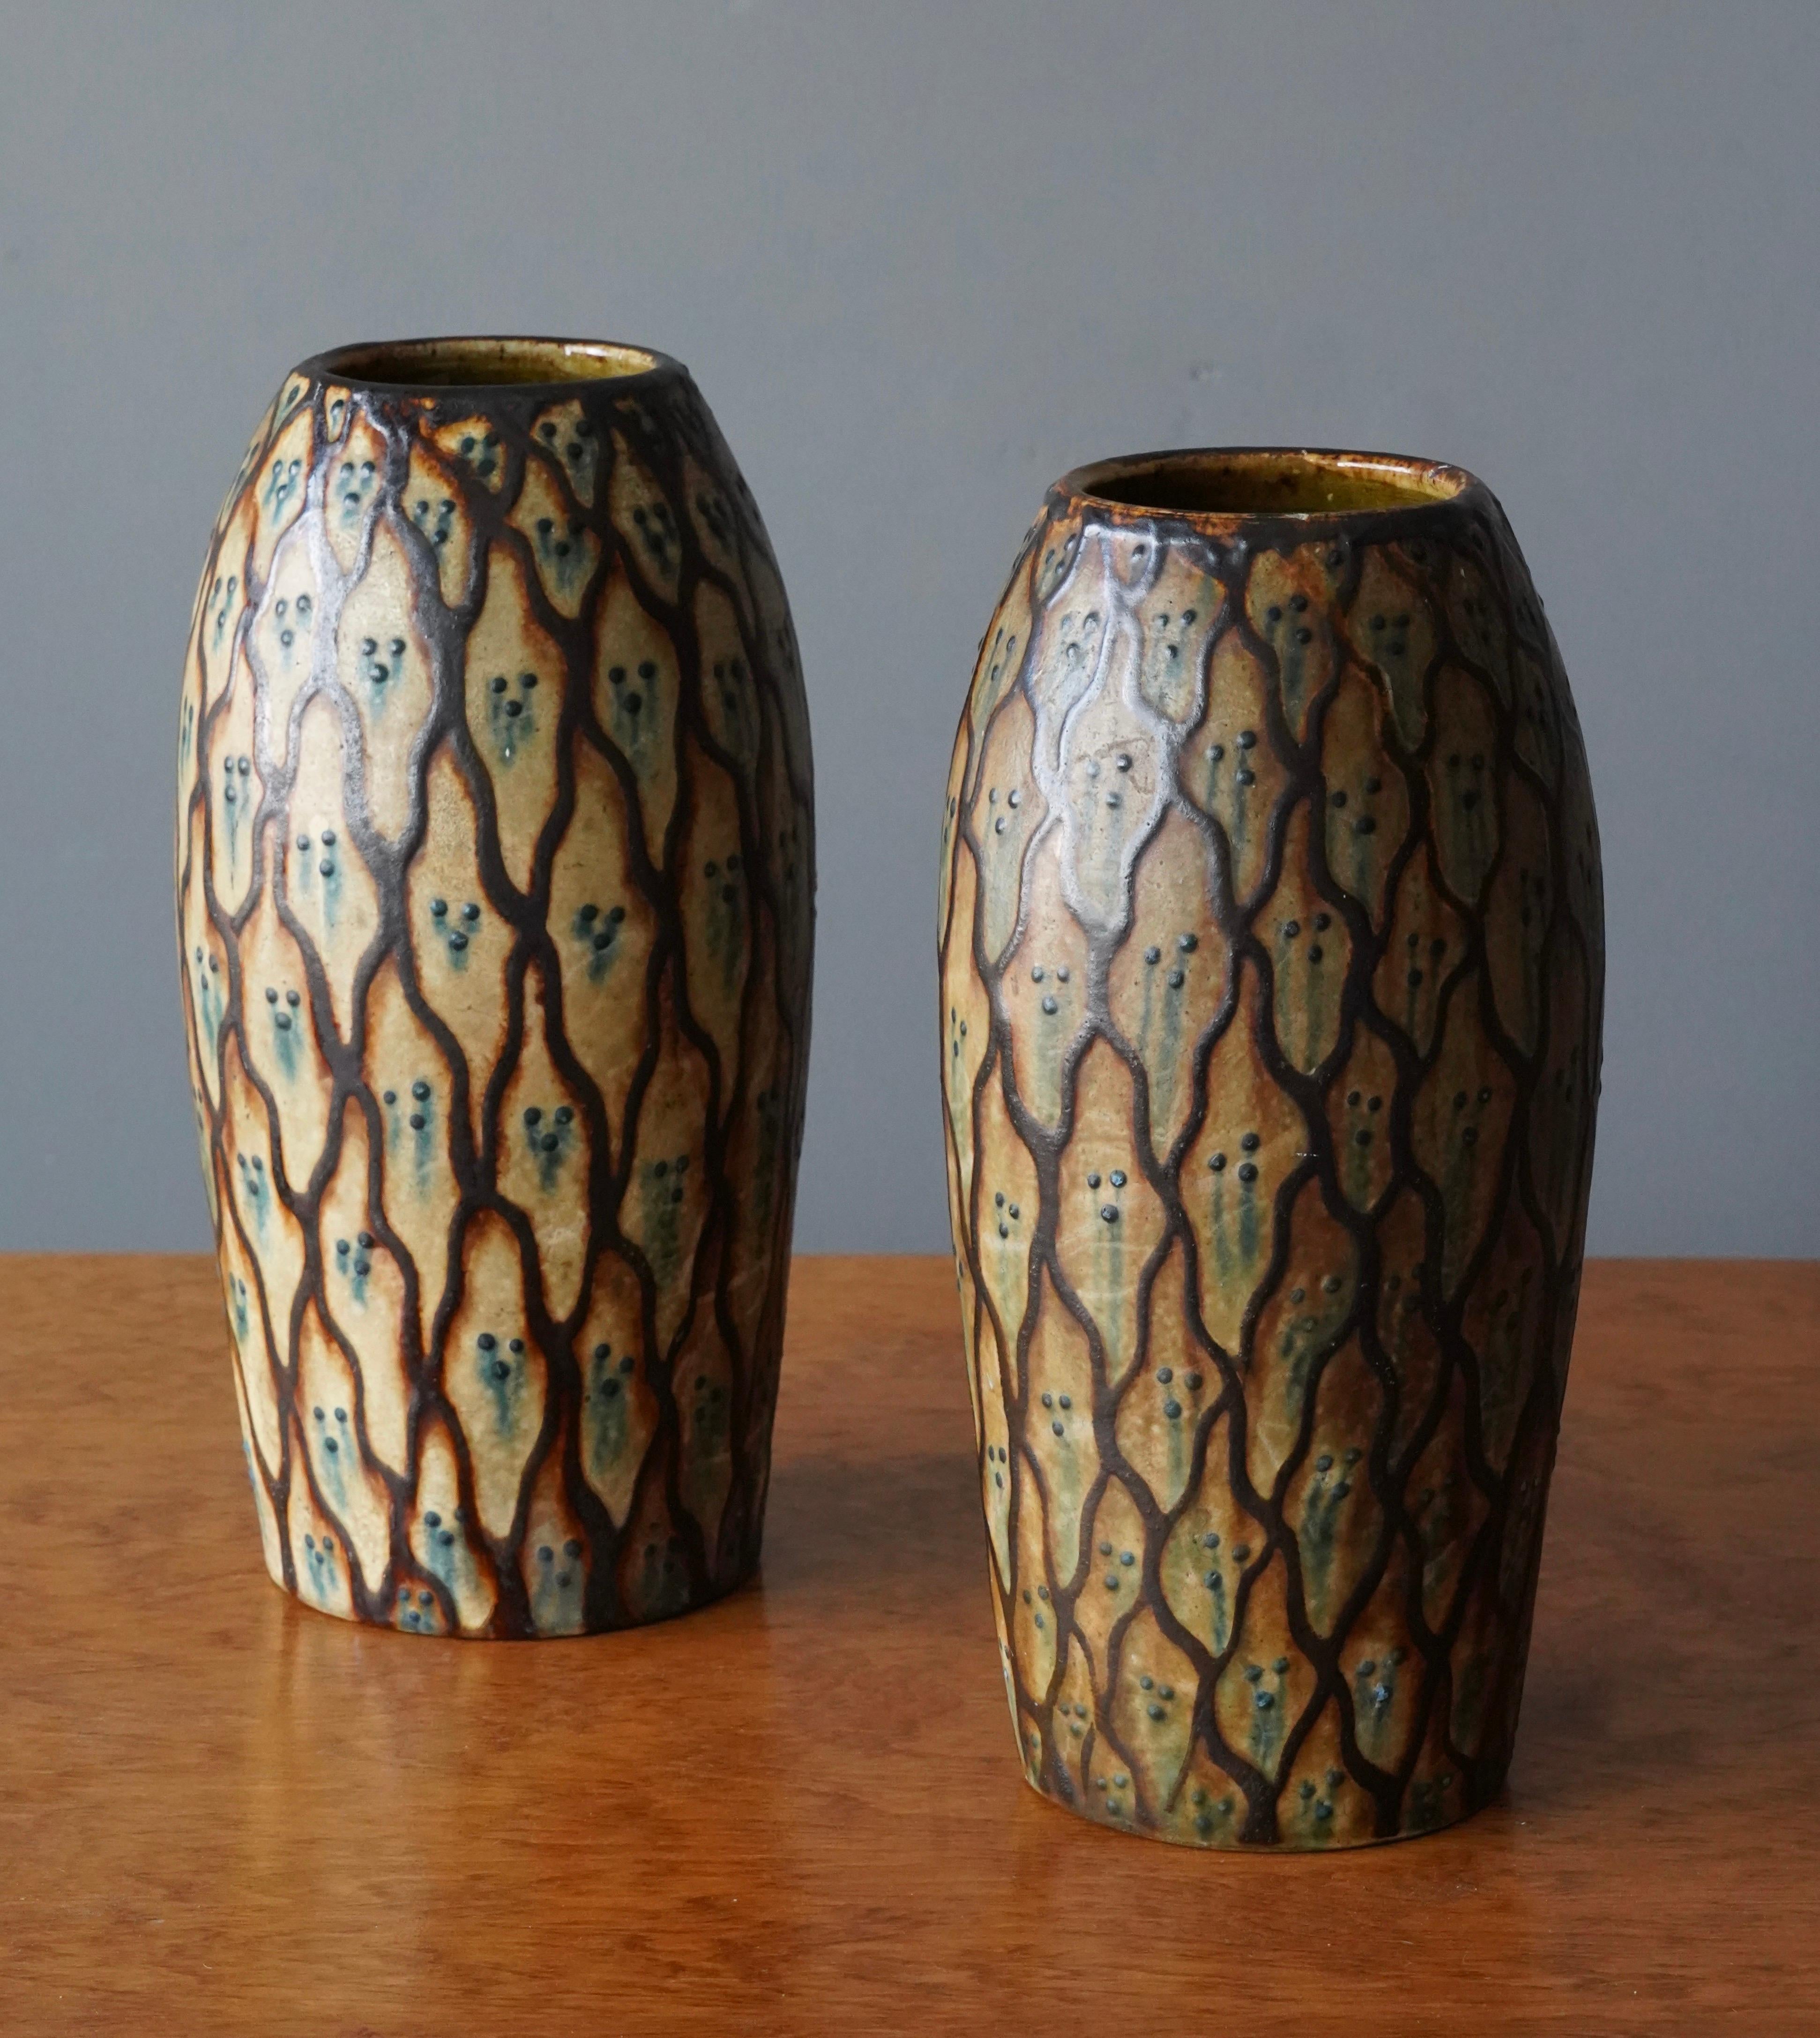 A pair of vases. In glazed and hand-painted ceramic. Unsigned.